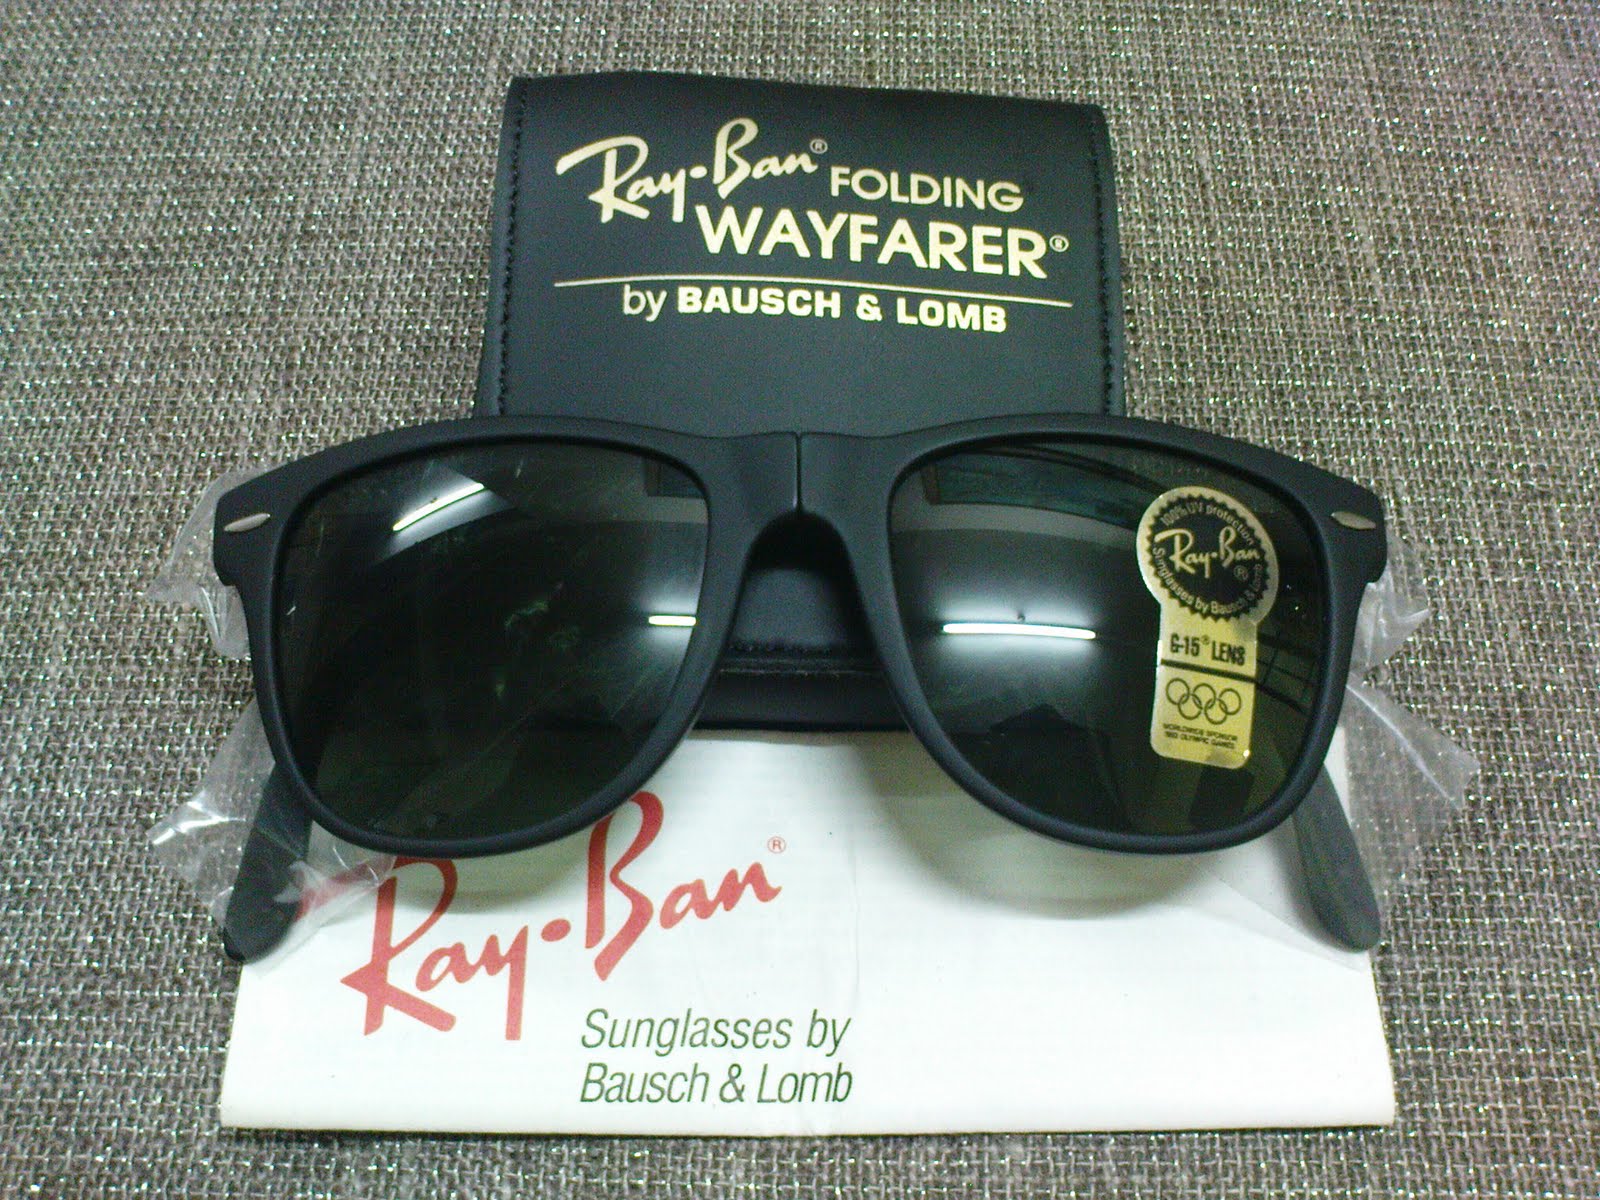 At first Train wipe out ray ban folding wayfarer parts | Money in the Banana Stand